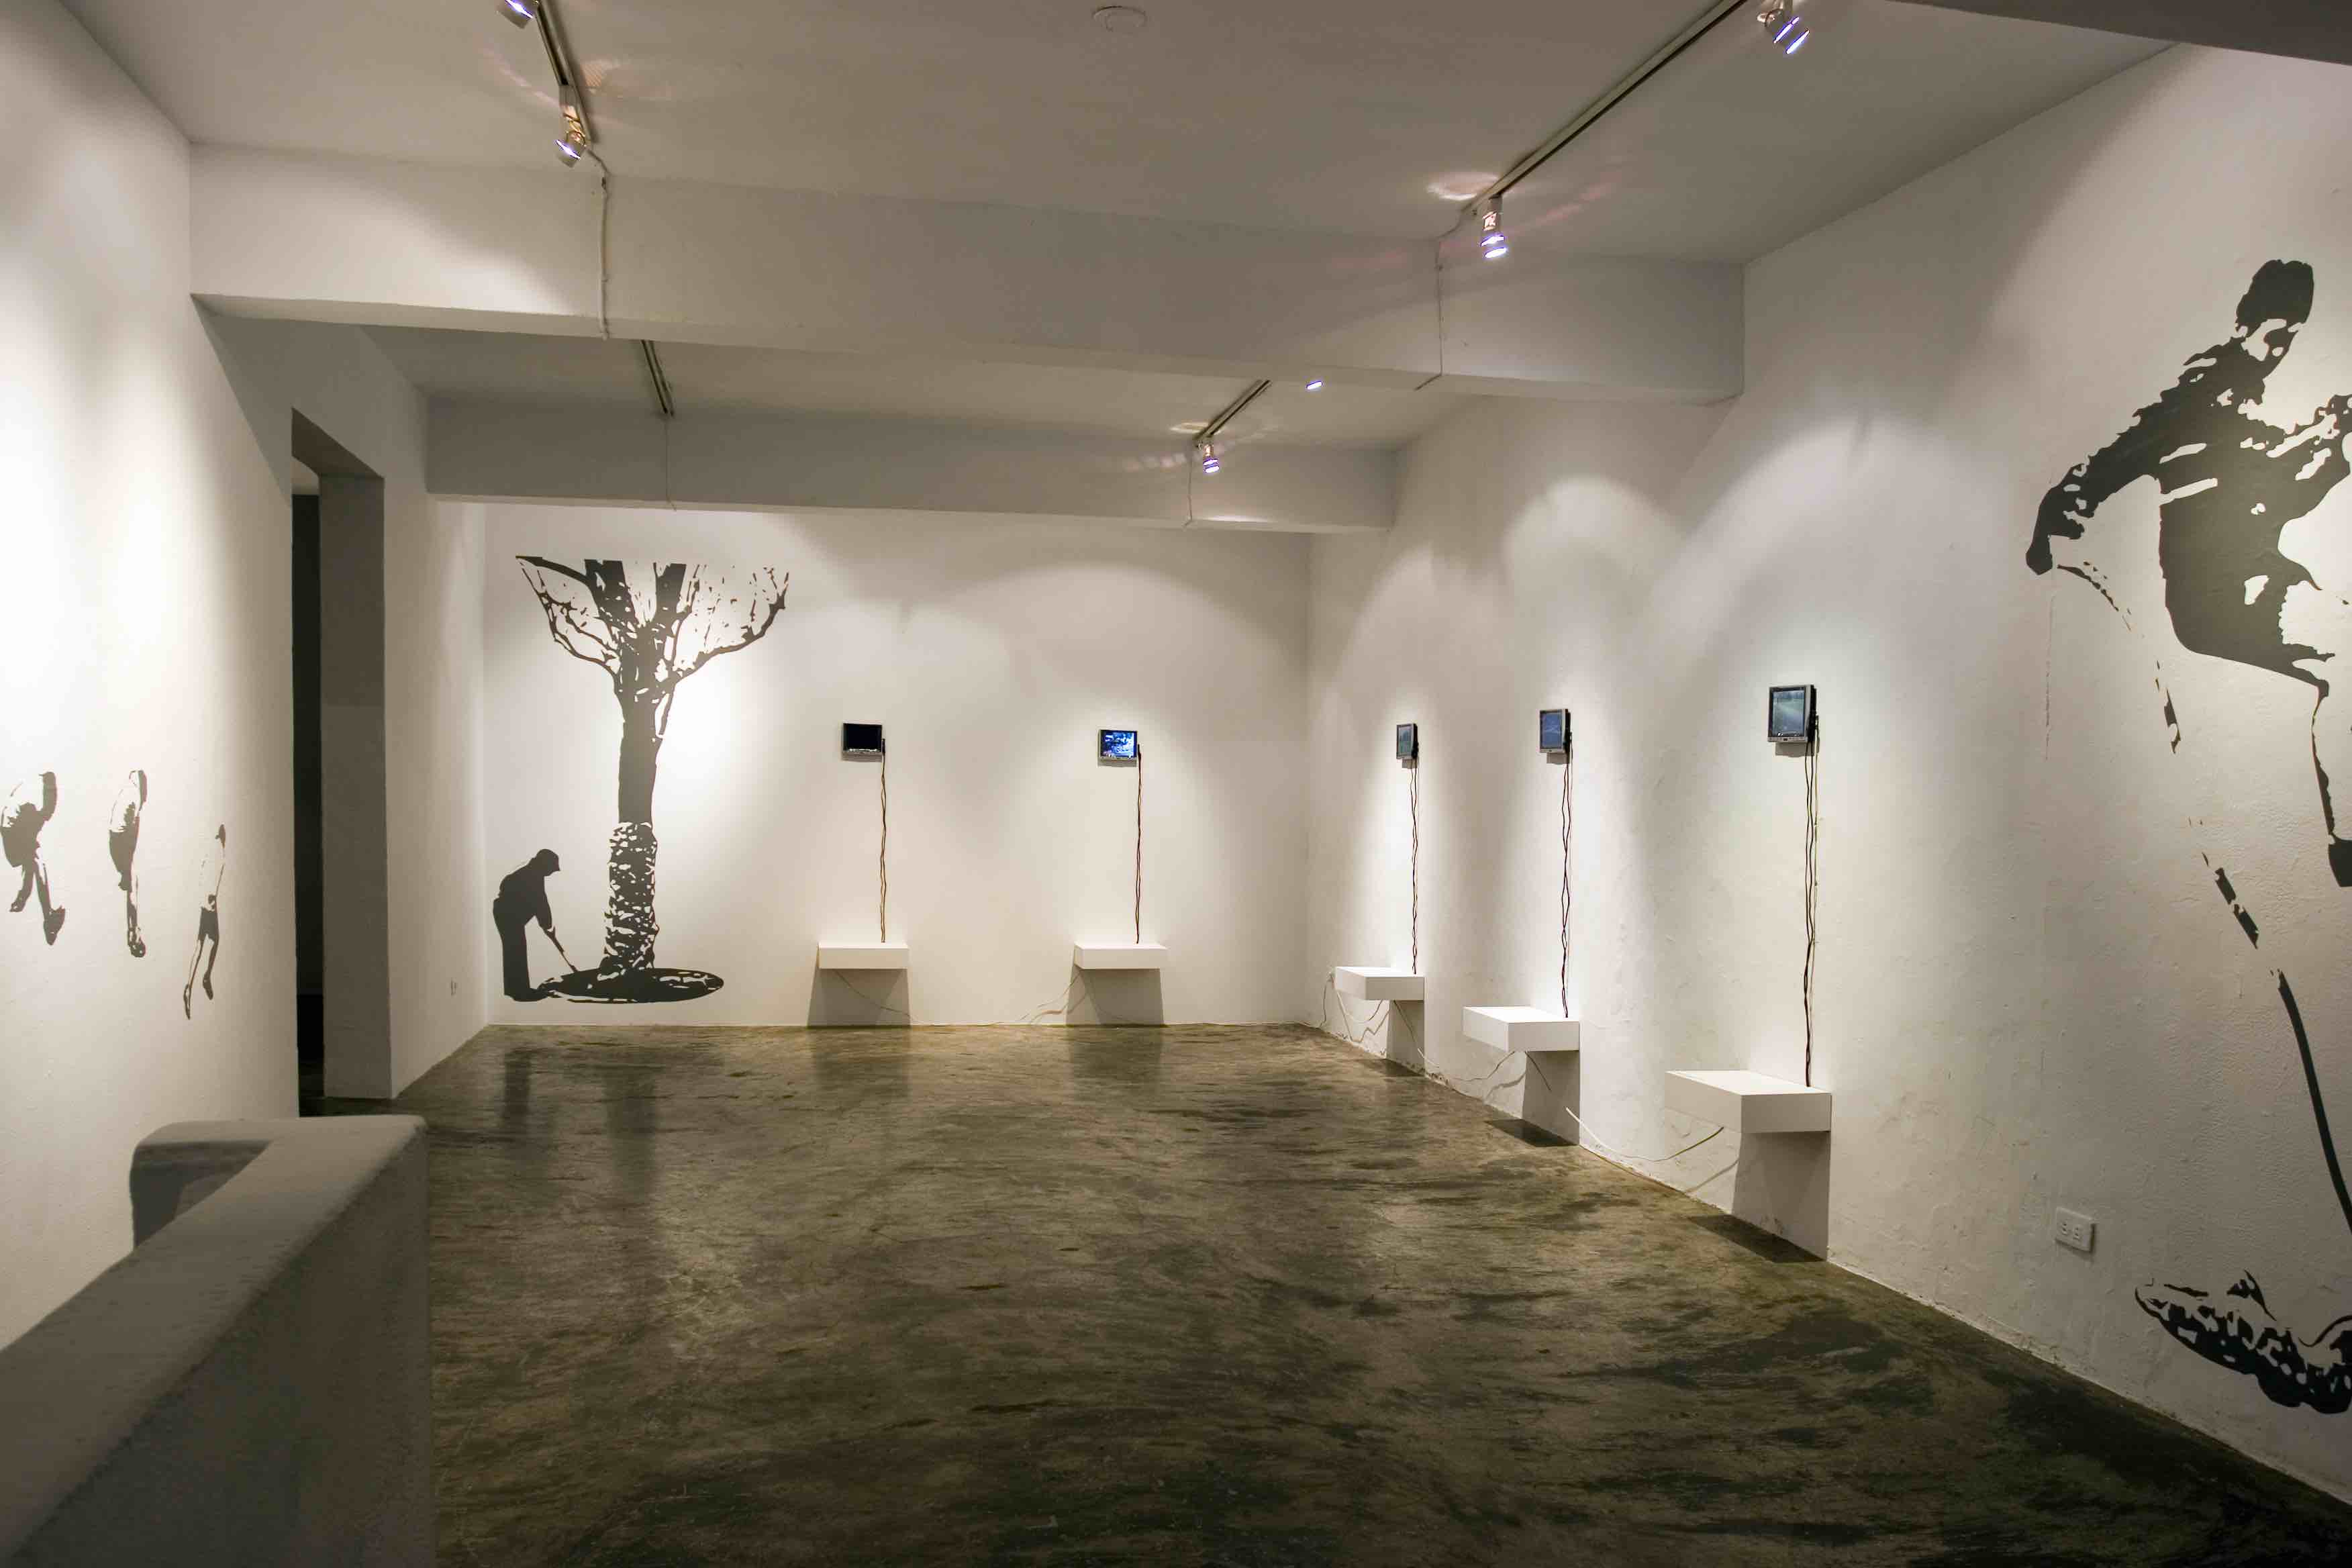 The Shortcut to the Systematic Life: City Spirits, Solo Exhibition by K. Y. Tsui